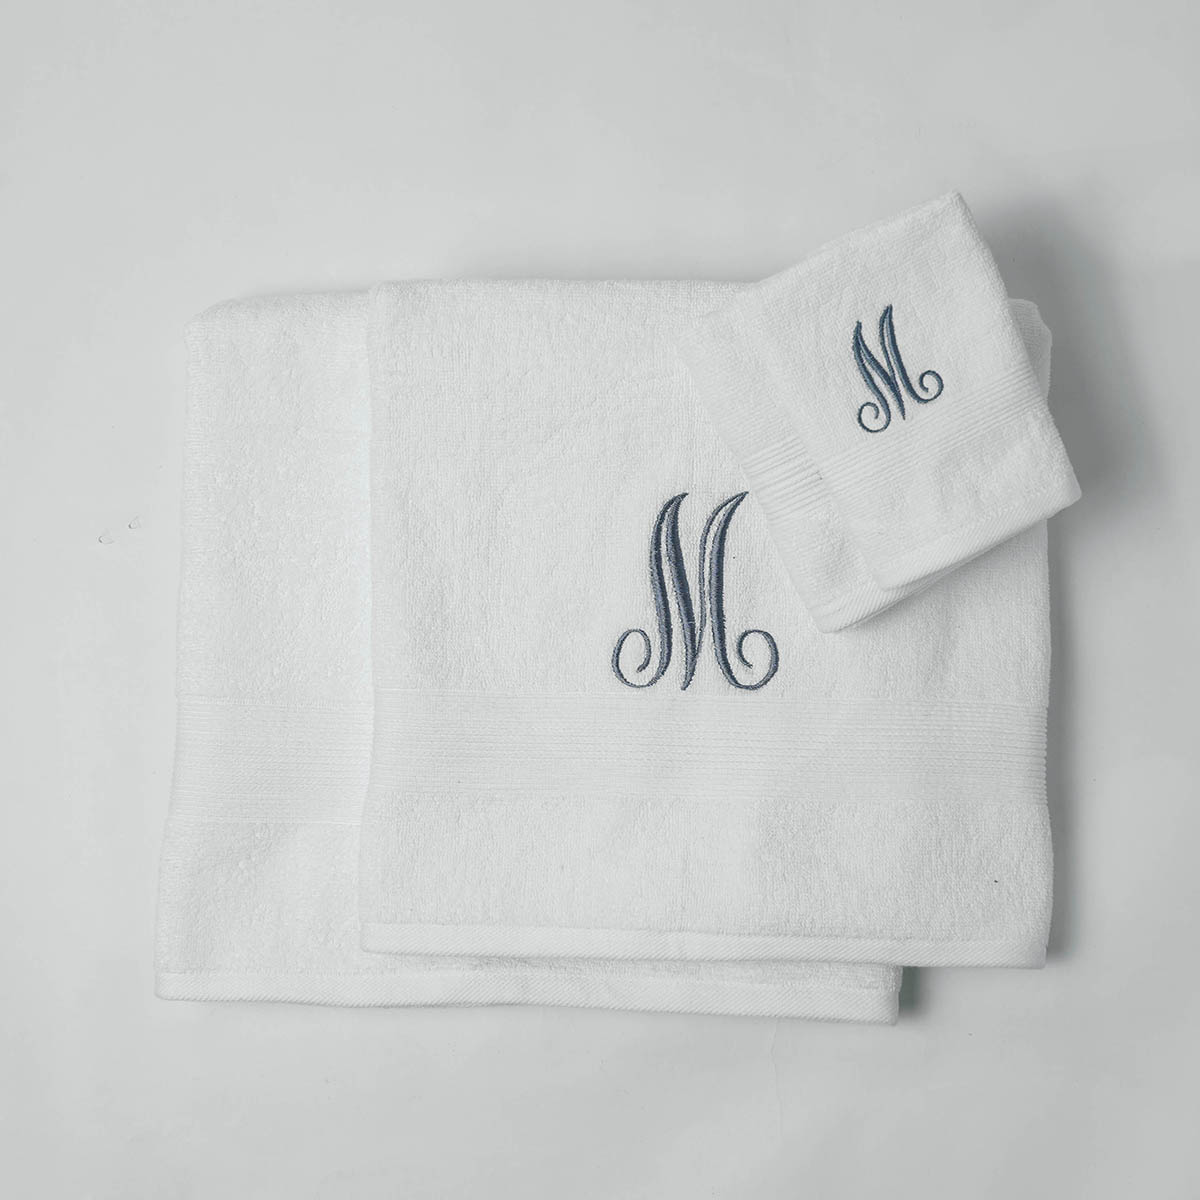 Monogrammed white organic cotton Bath towels, sizes available